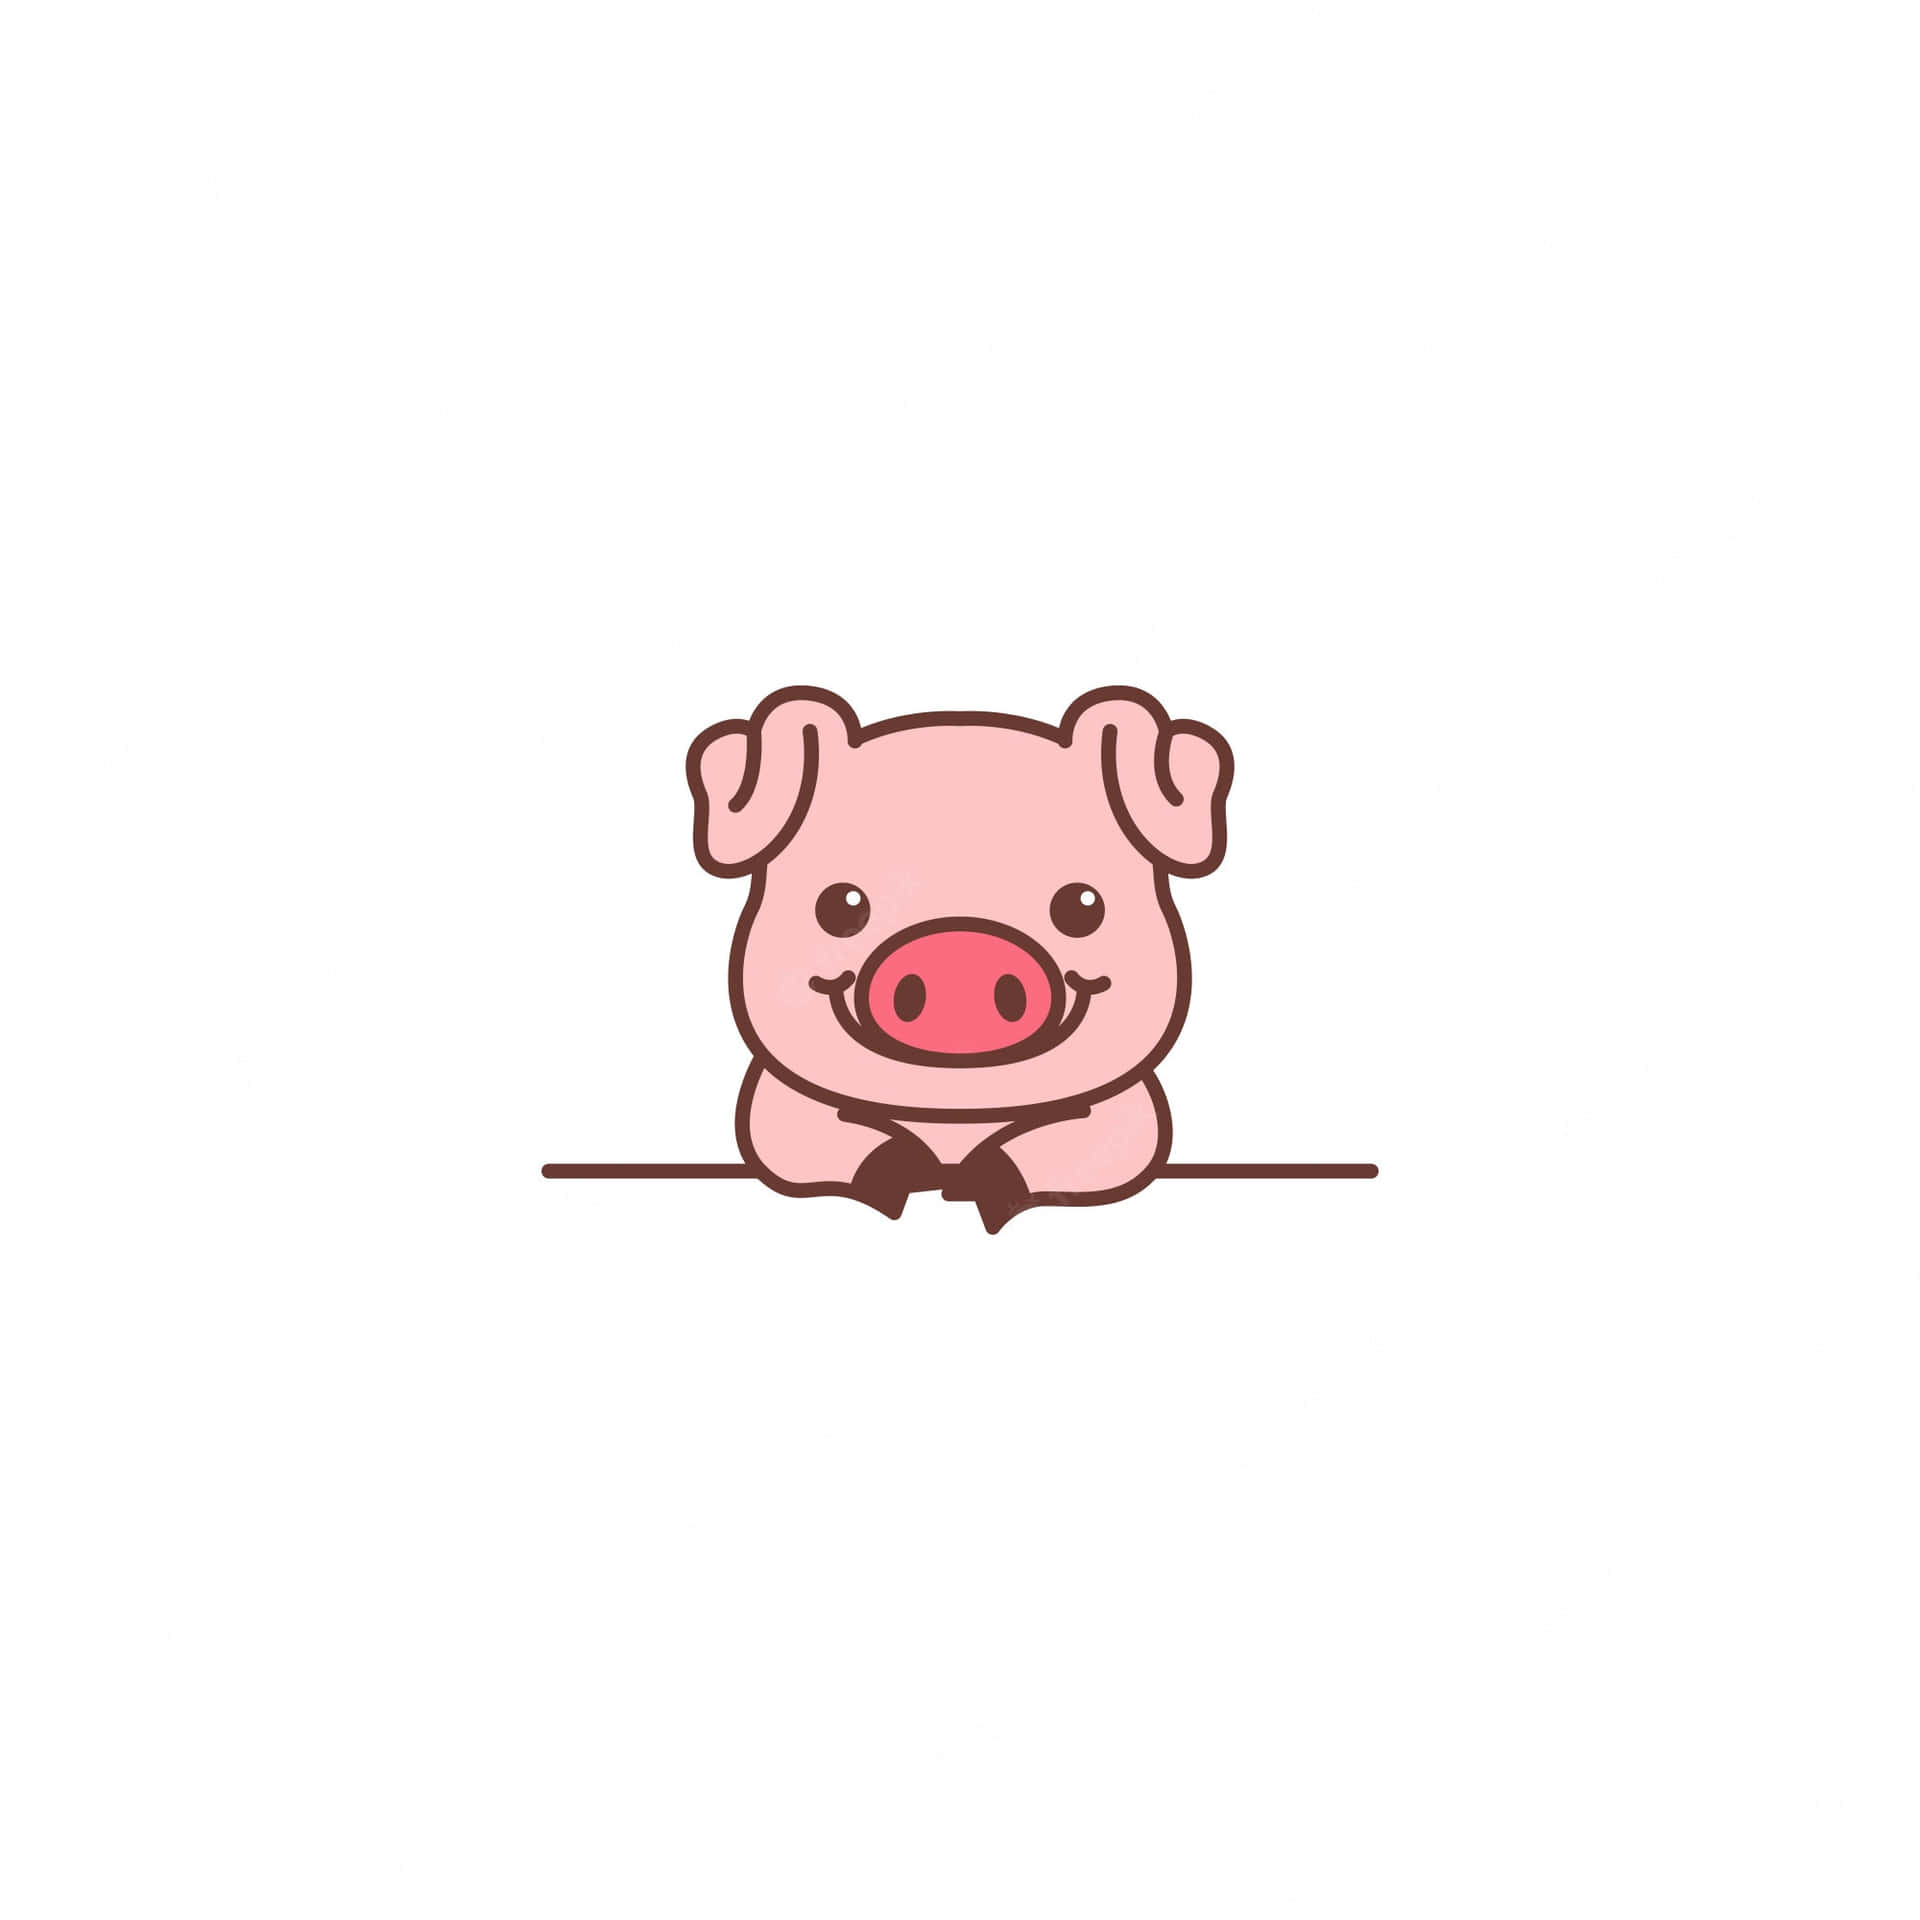 "Say hello to this cute pig!"